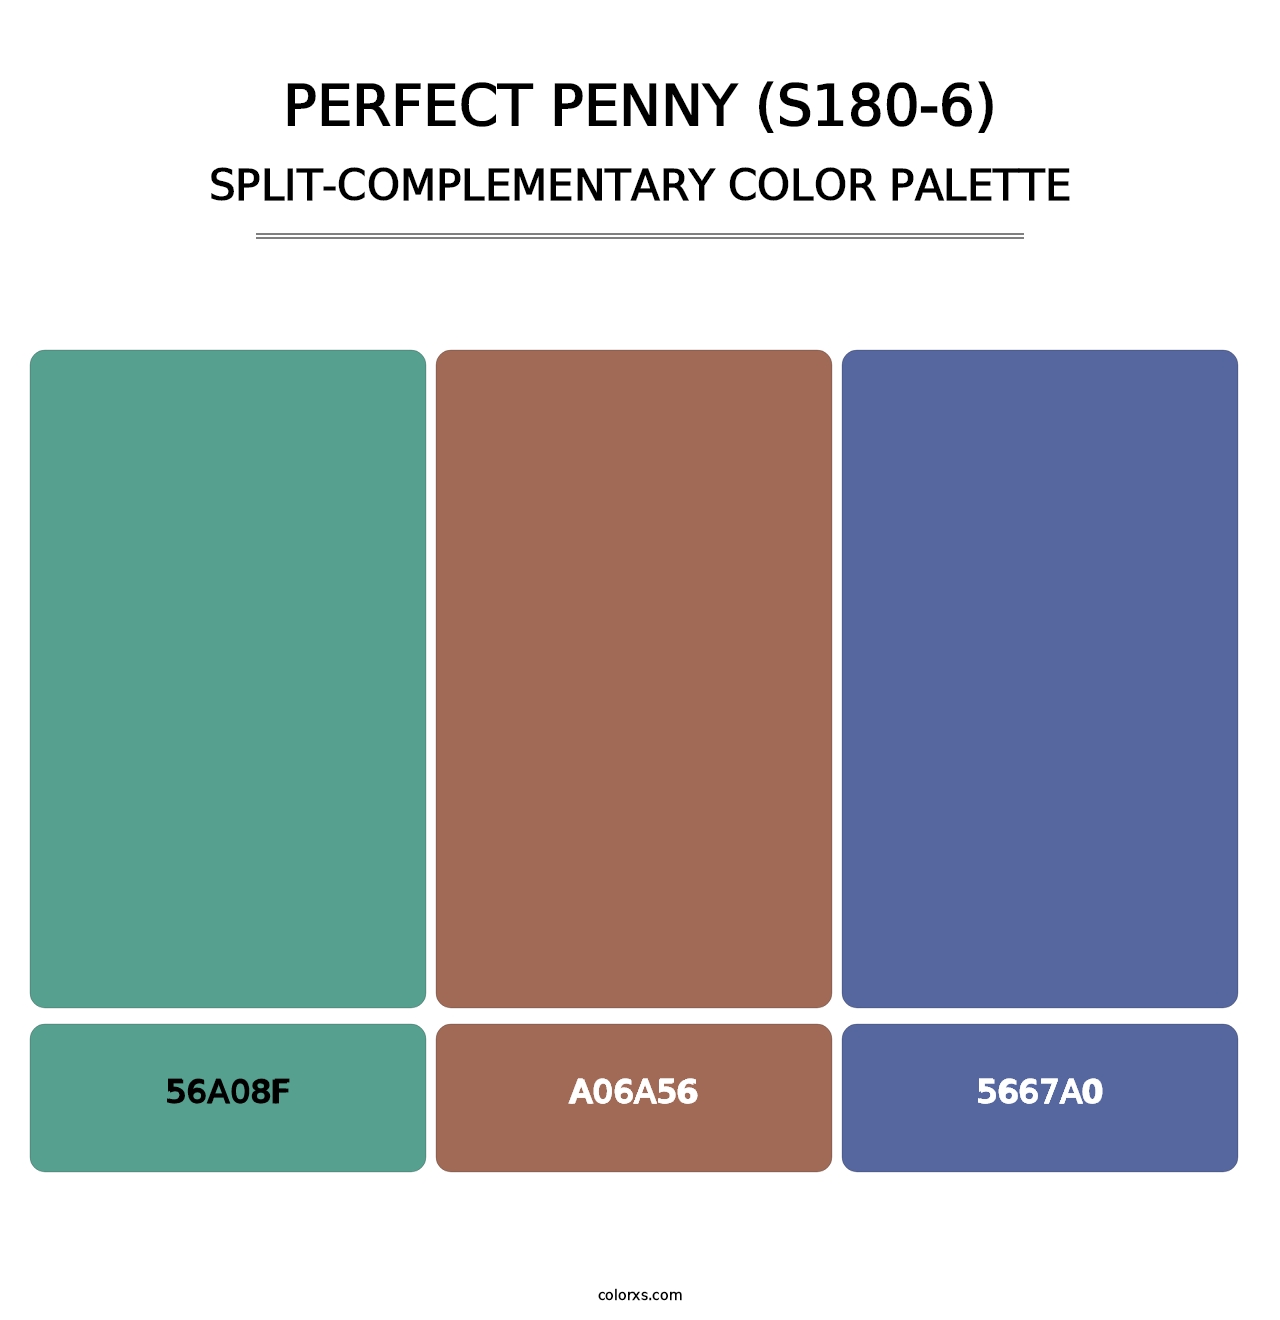 Perfect Penny (S180-6) - Split-Complementary Color Palette